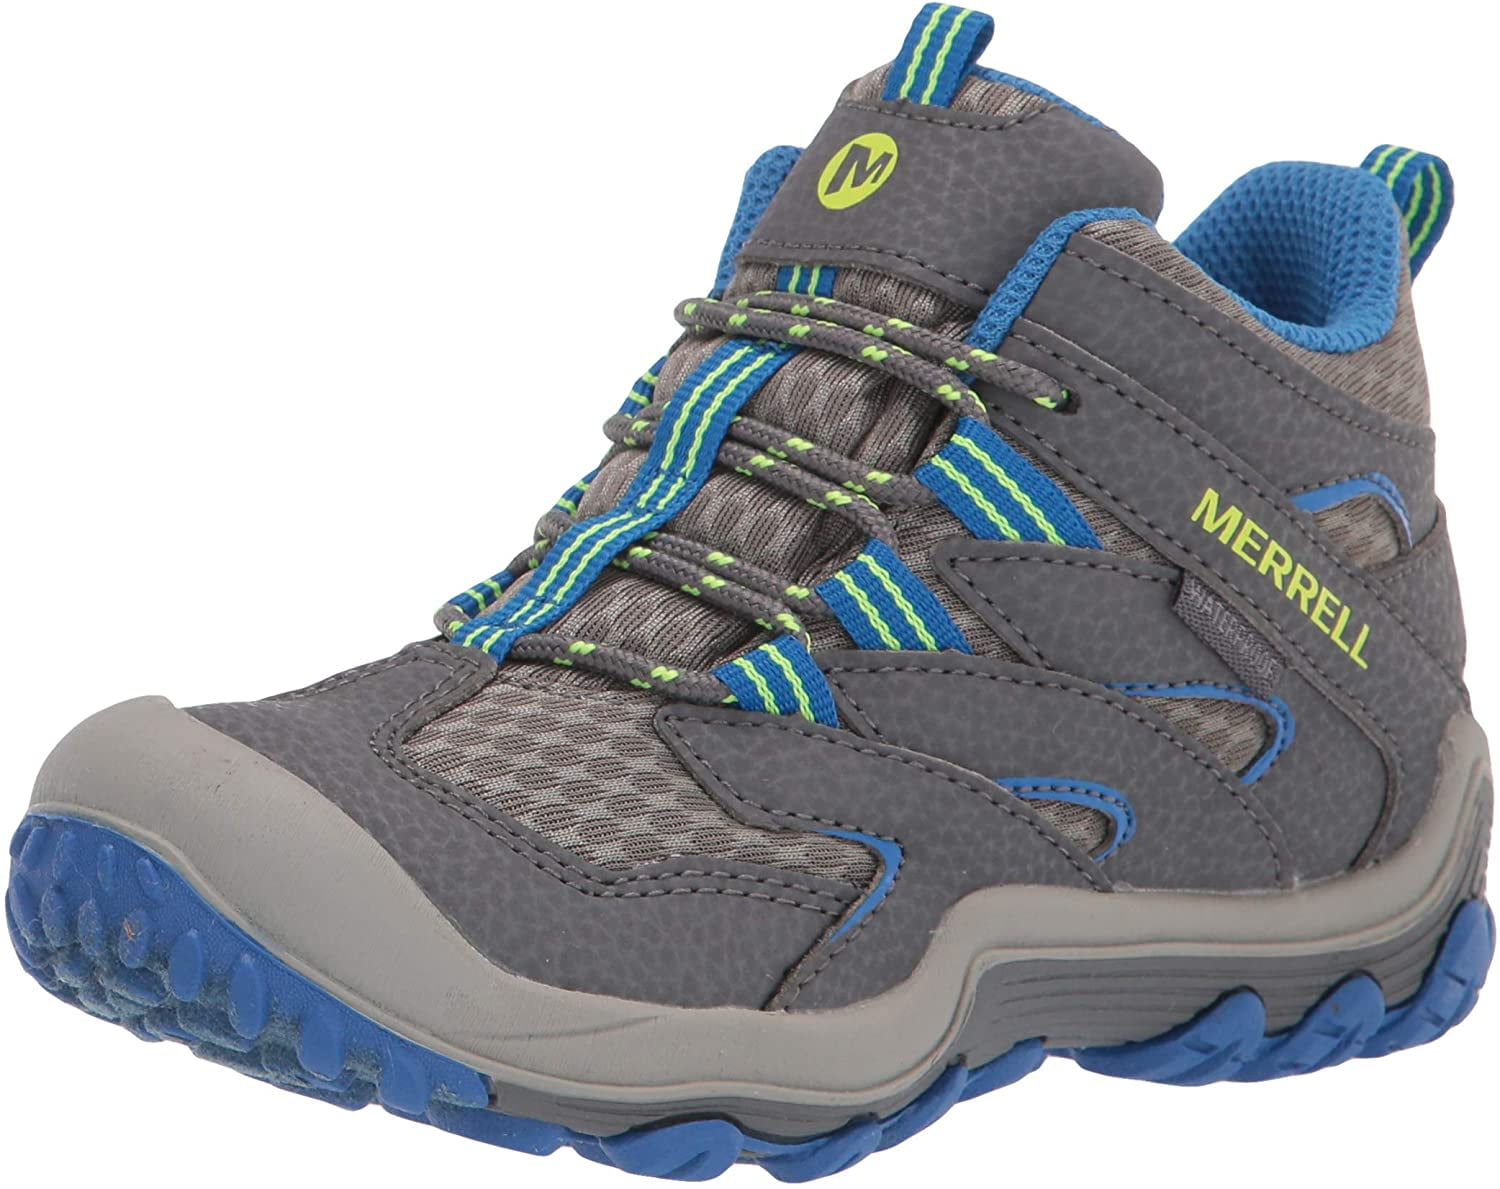 Merrell Boys Chameleon 7 Low A/C Waterproof Shoes Black Sports Outdoors 